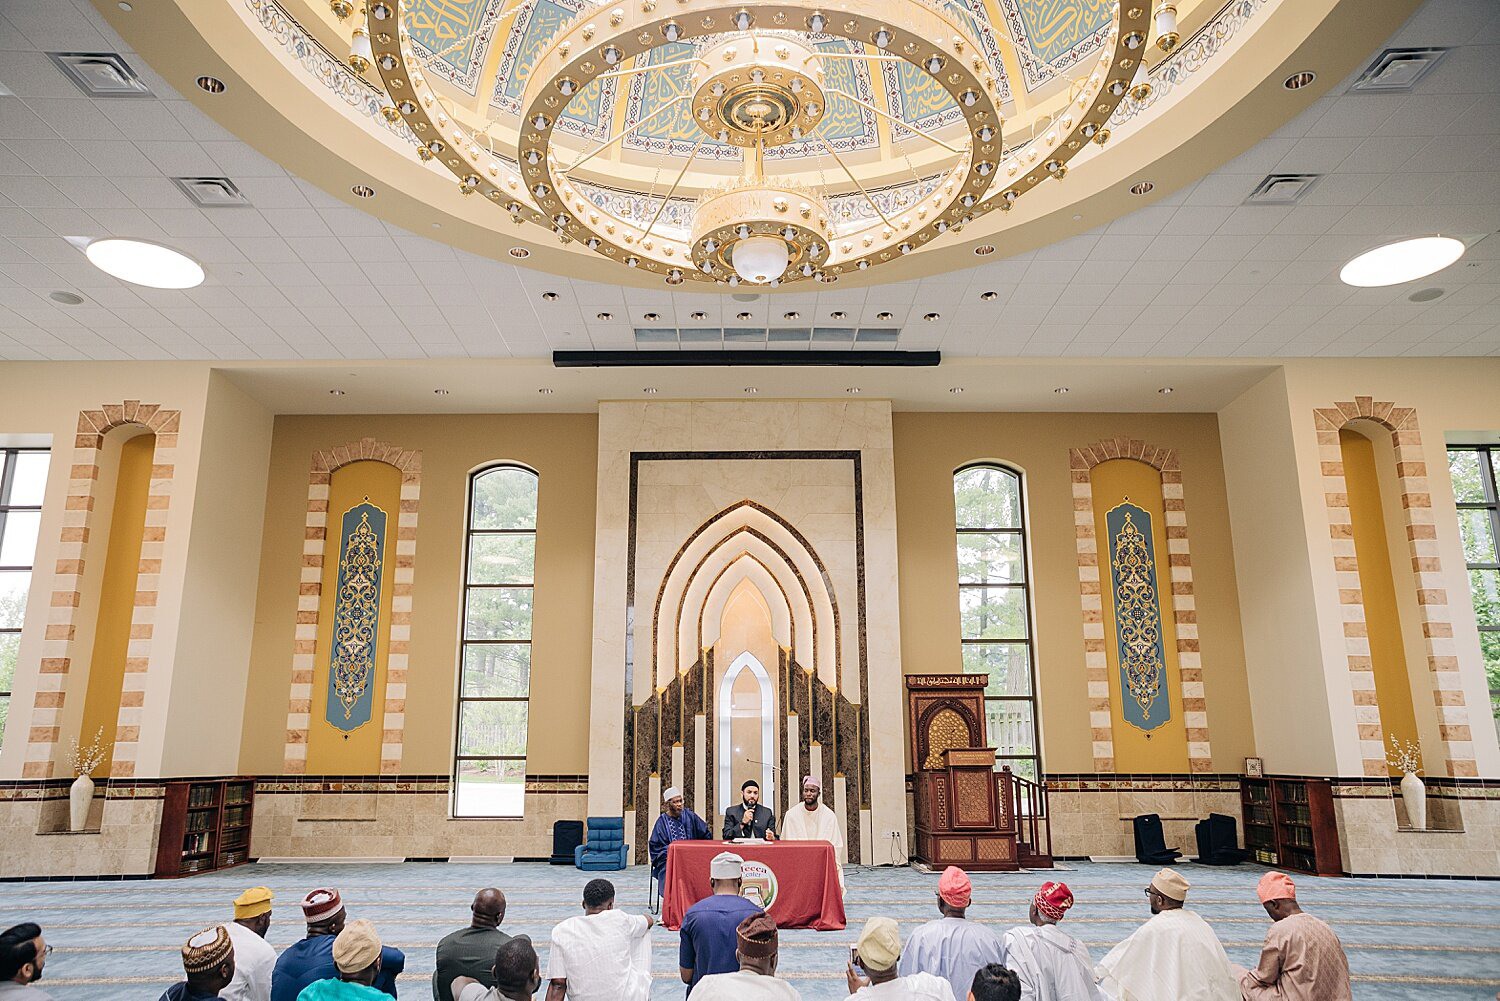 Males attending a 2019 Muslim Nikkah, or wedding, at the Mecca Center in Willowbrook, Illinois. Photo by Fariha Wajid Photography